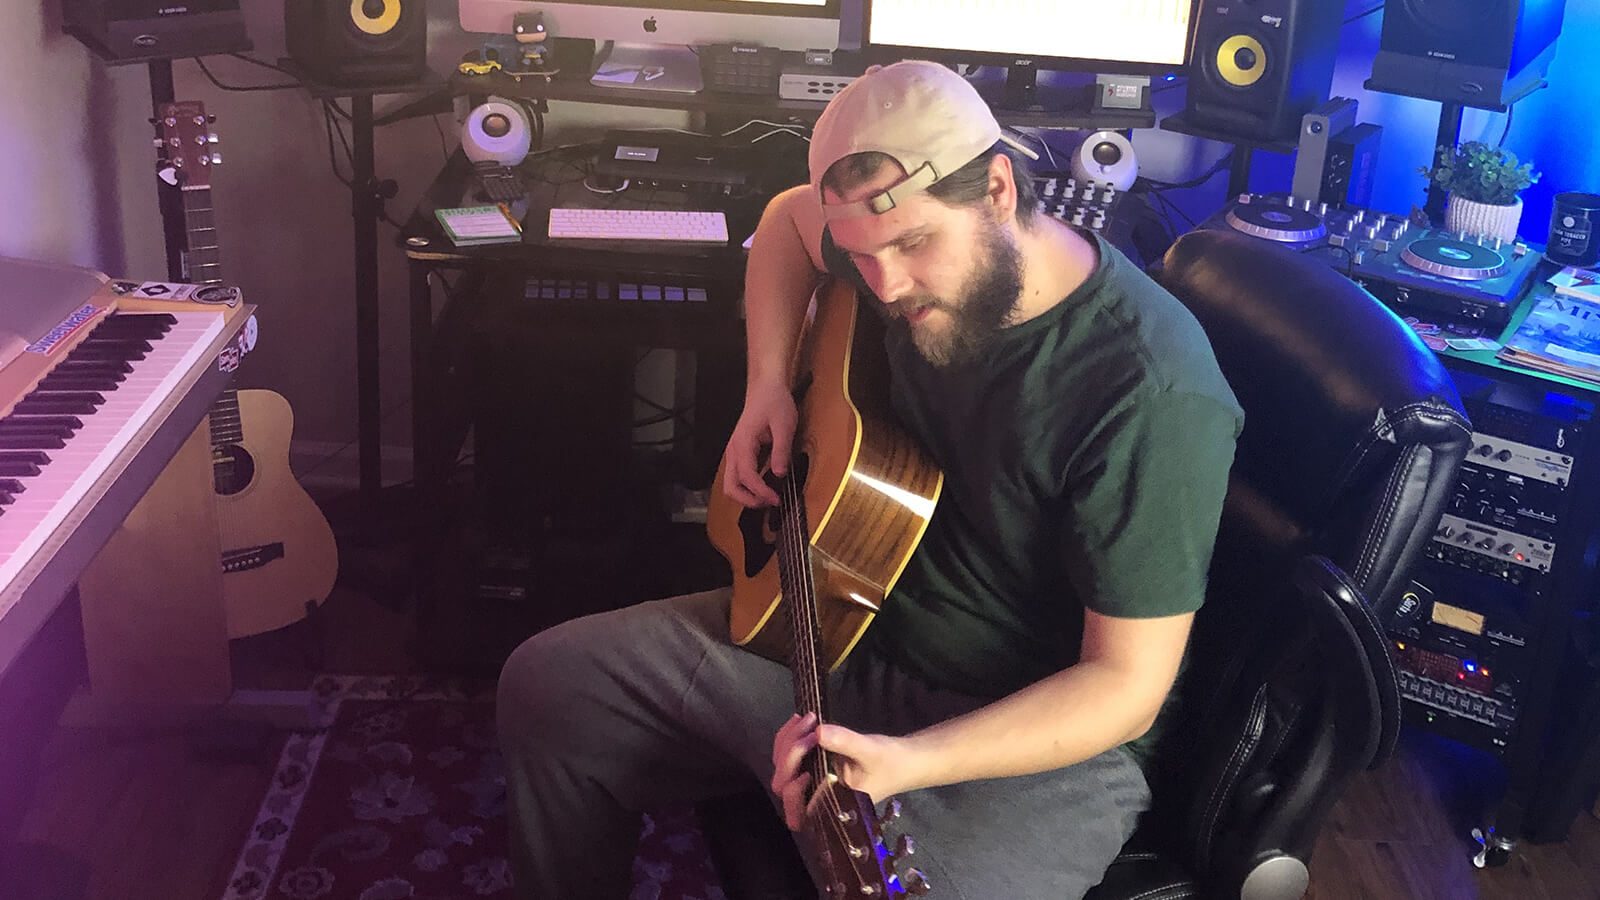 This Recording Arts Grad Develops Creative Tools for Songwriters - Hero image 